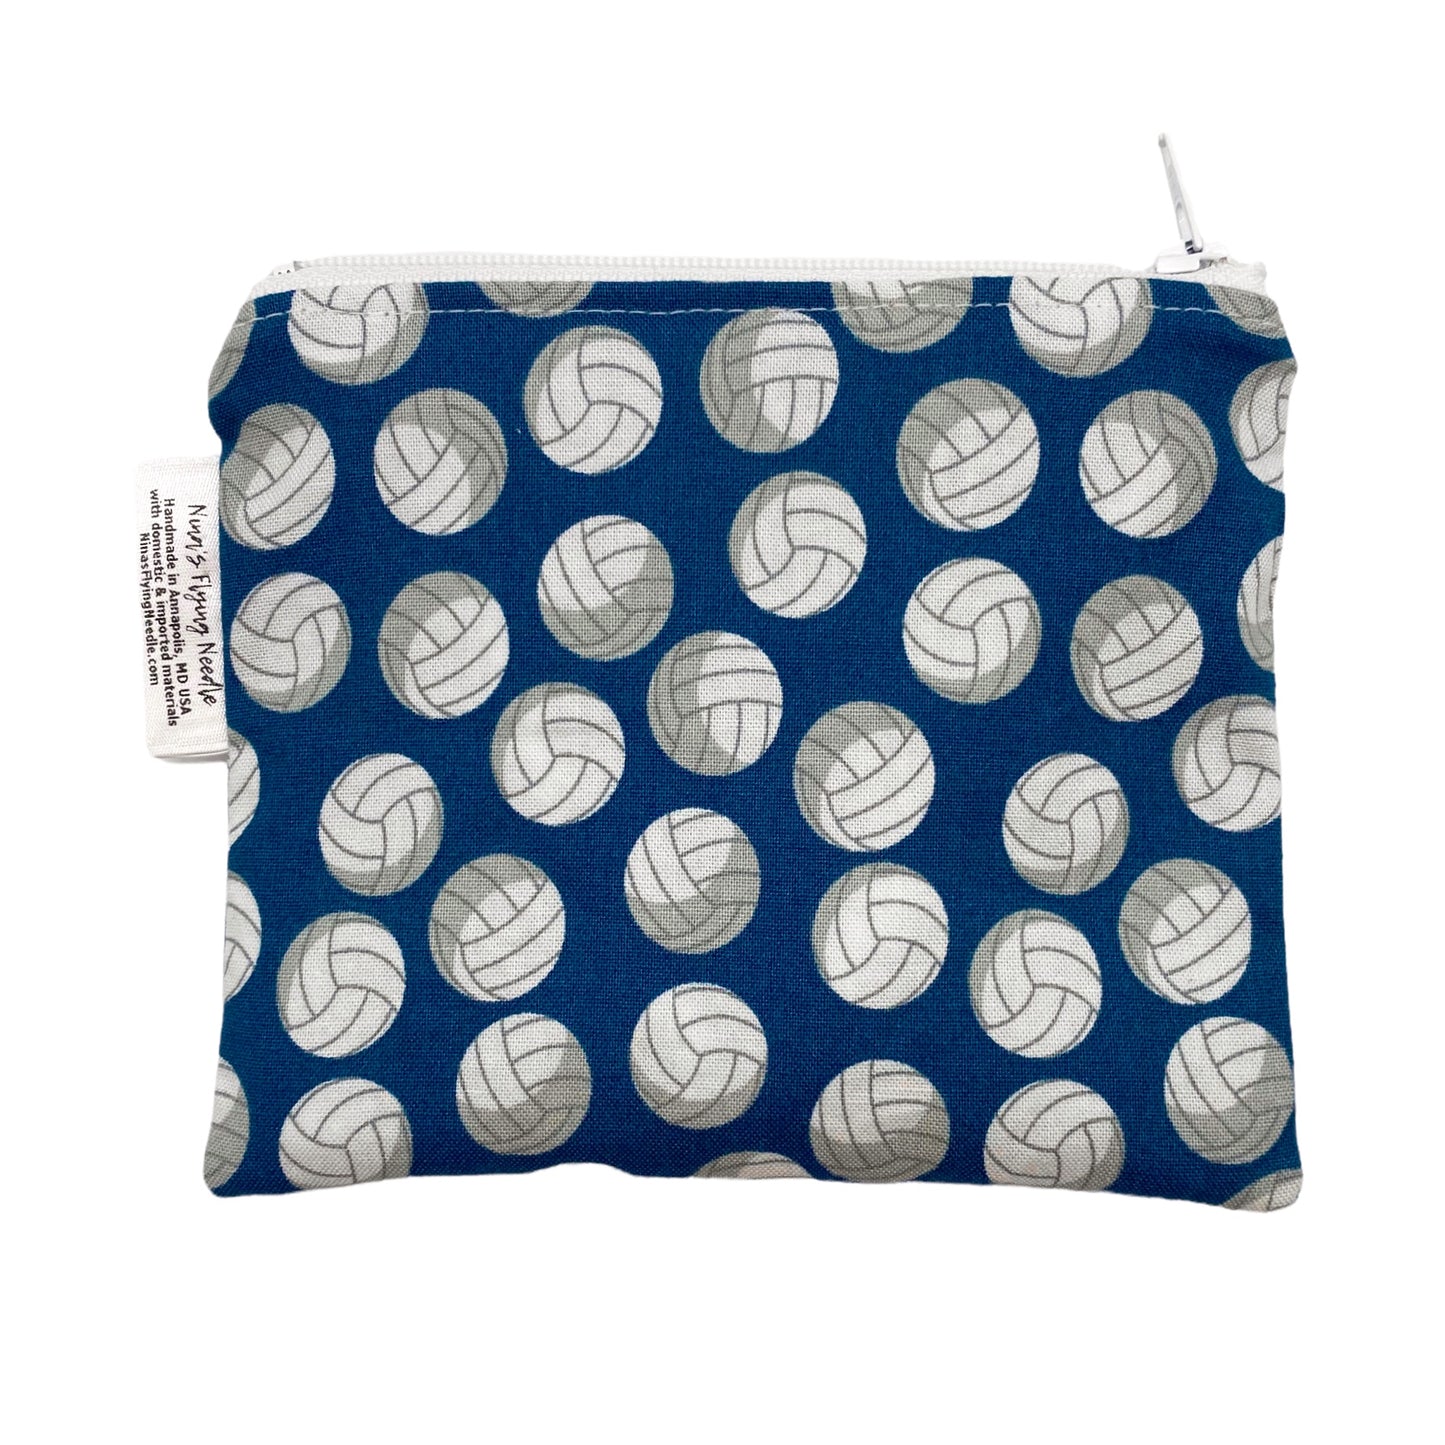 Toddler Sized Reusable Zippered Bag Volleyball